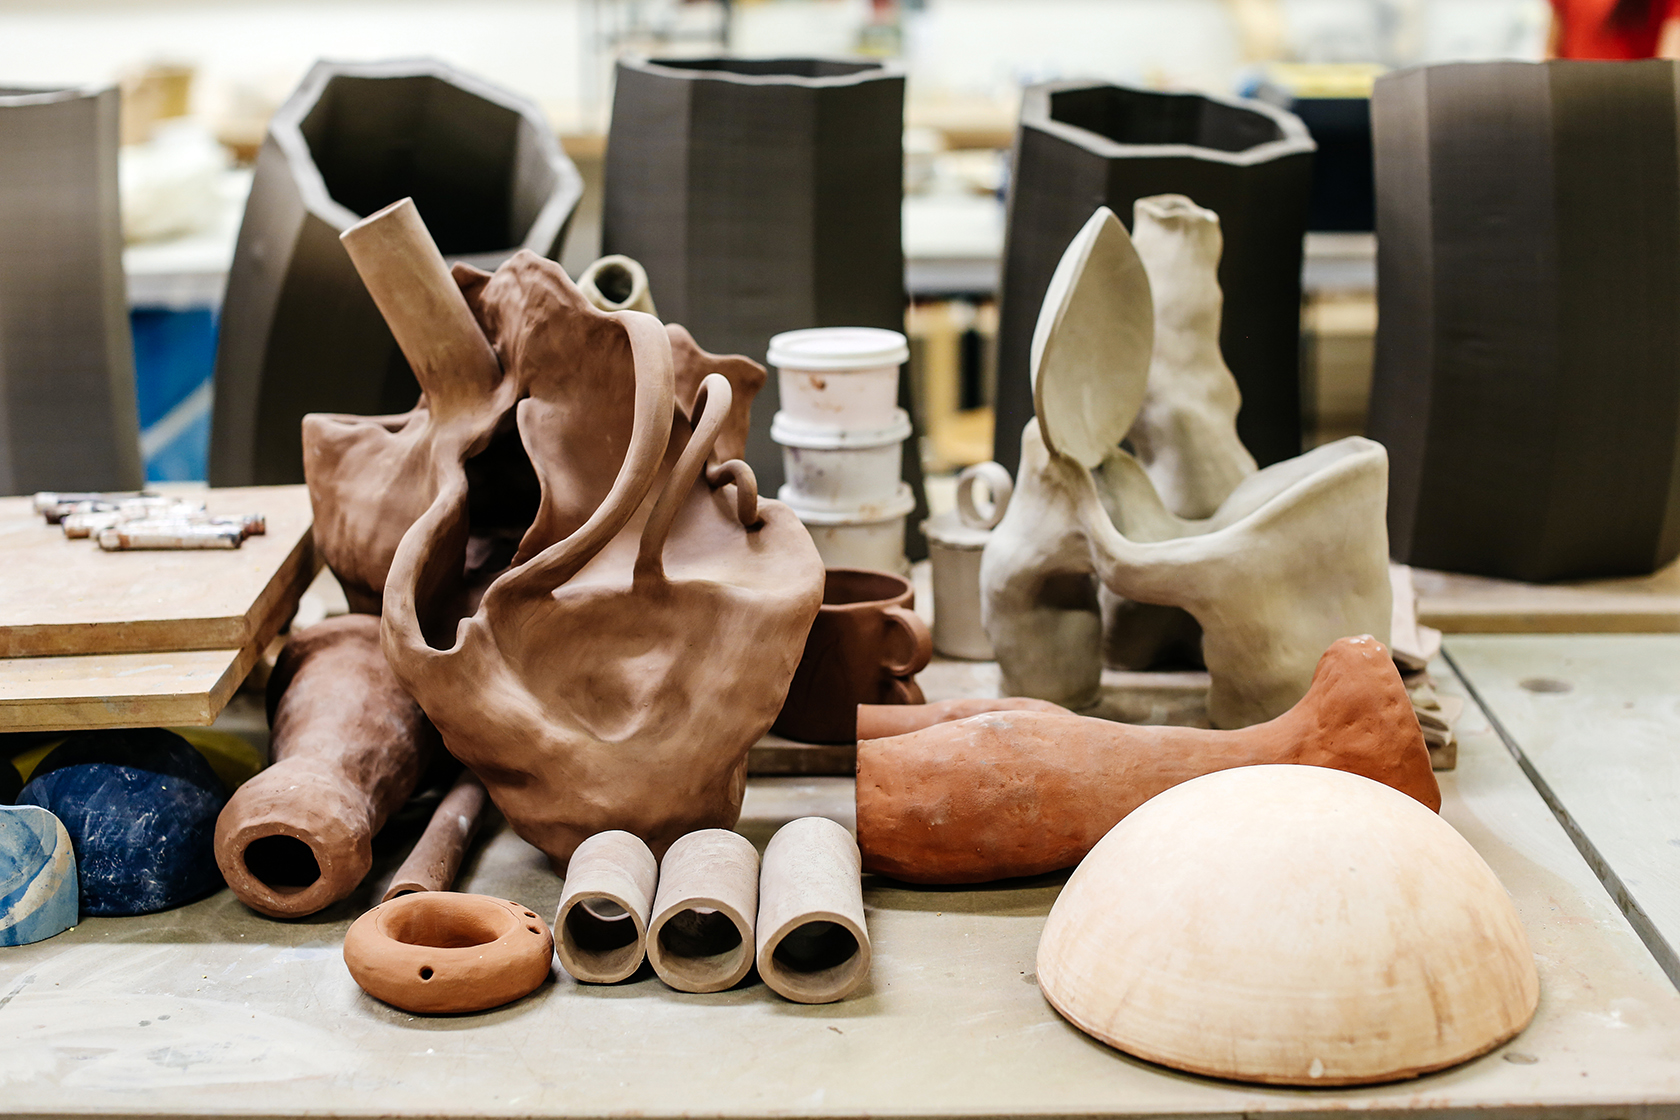 Shot of ceramic models made of clay in a studio